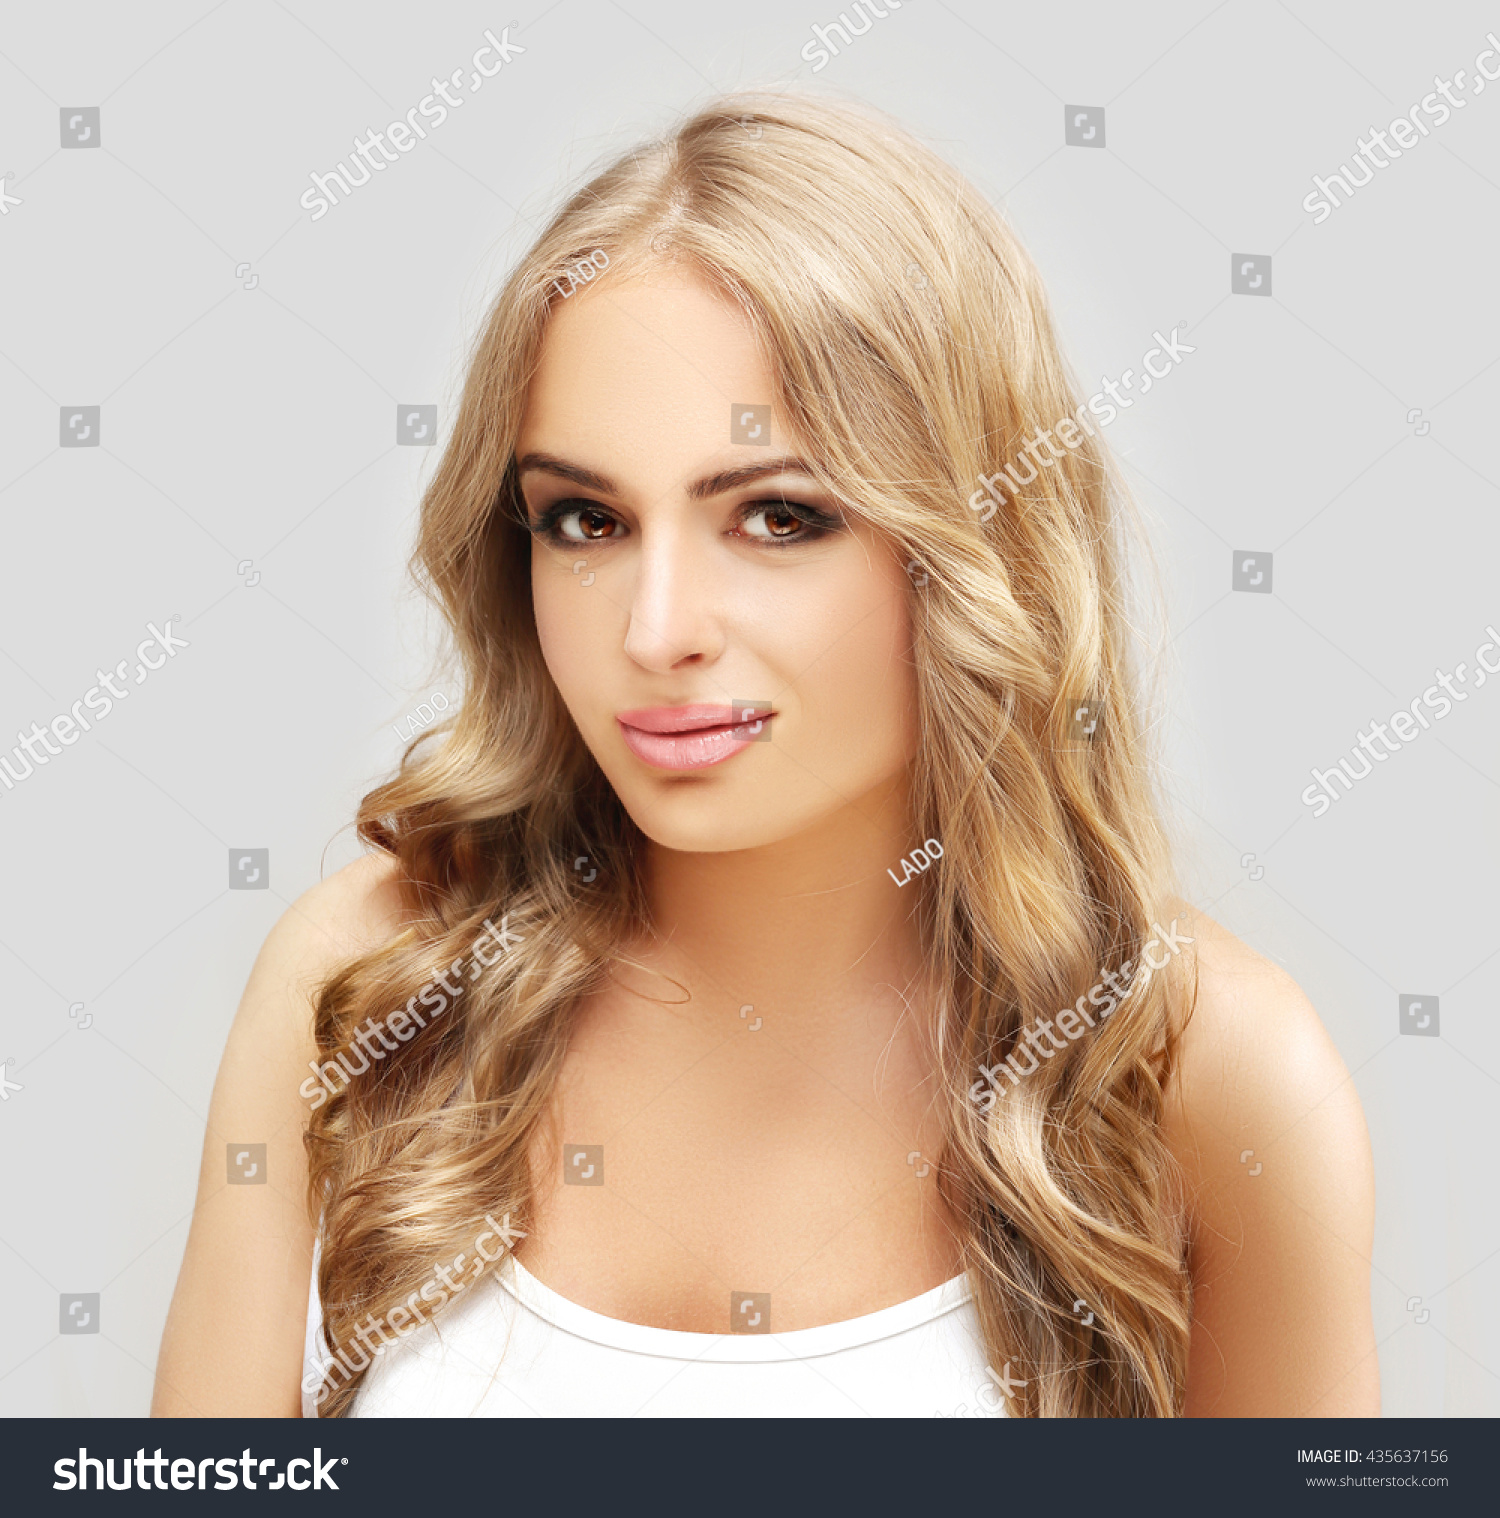 Beauty portrait of a young girl. Fresh Clean Skin #435637156